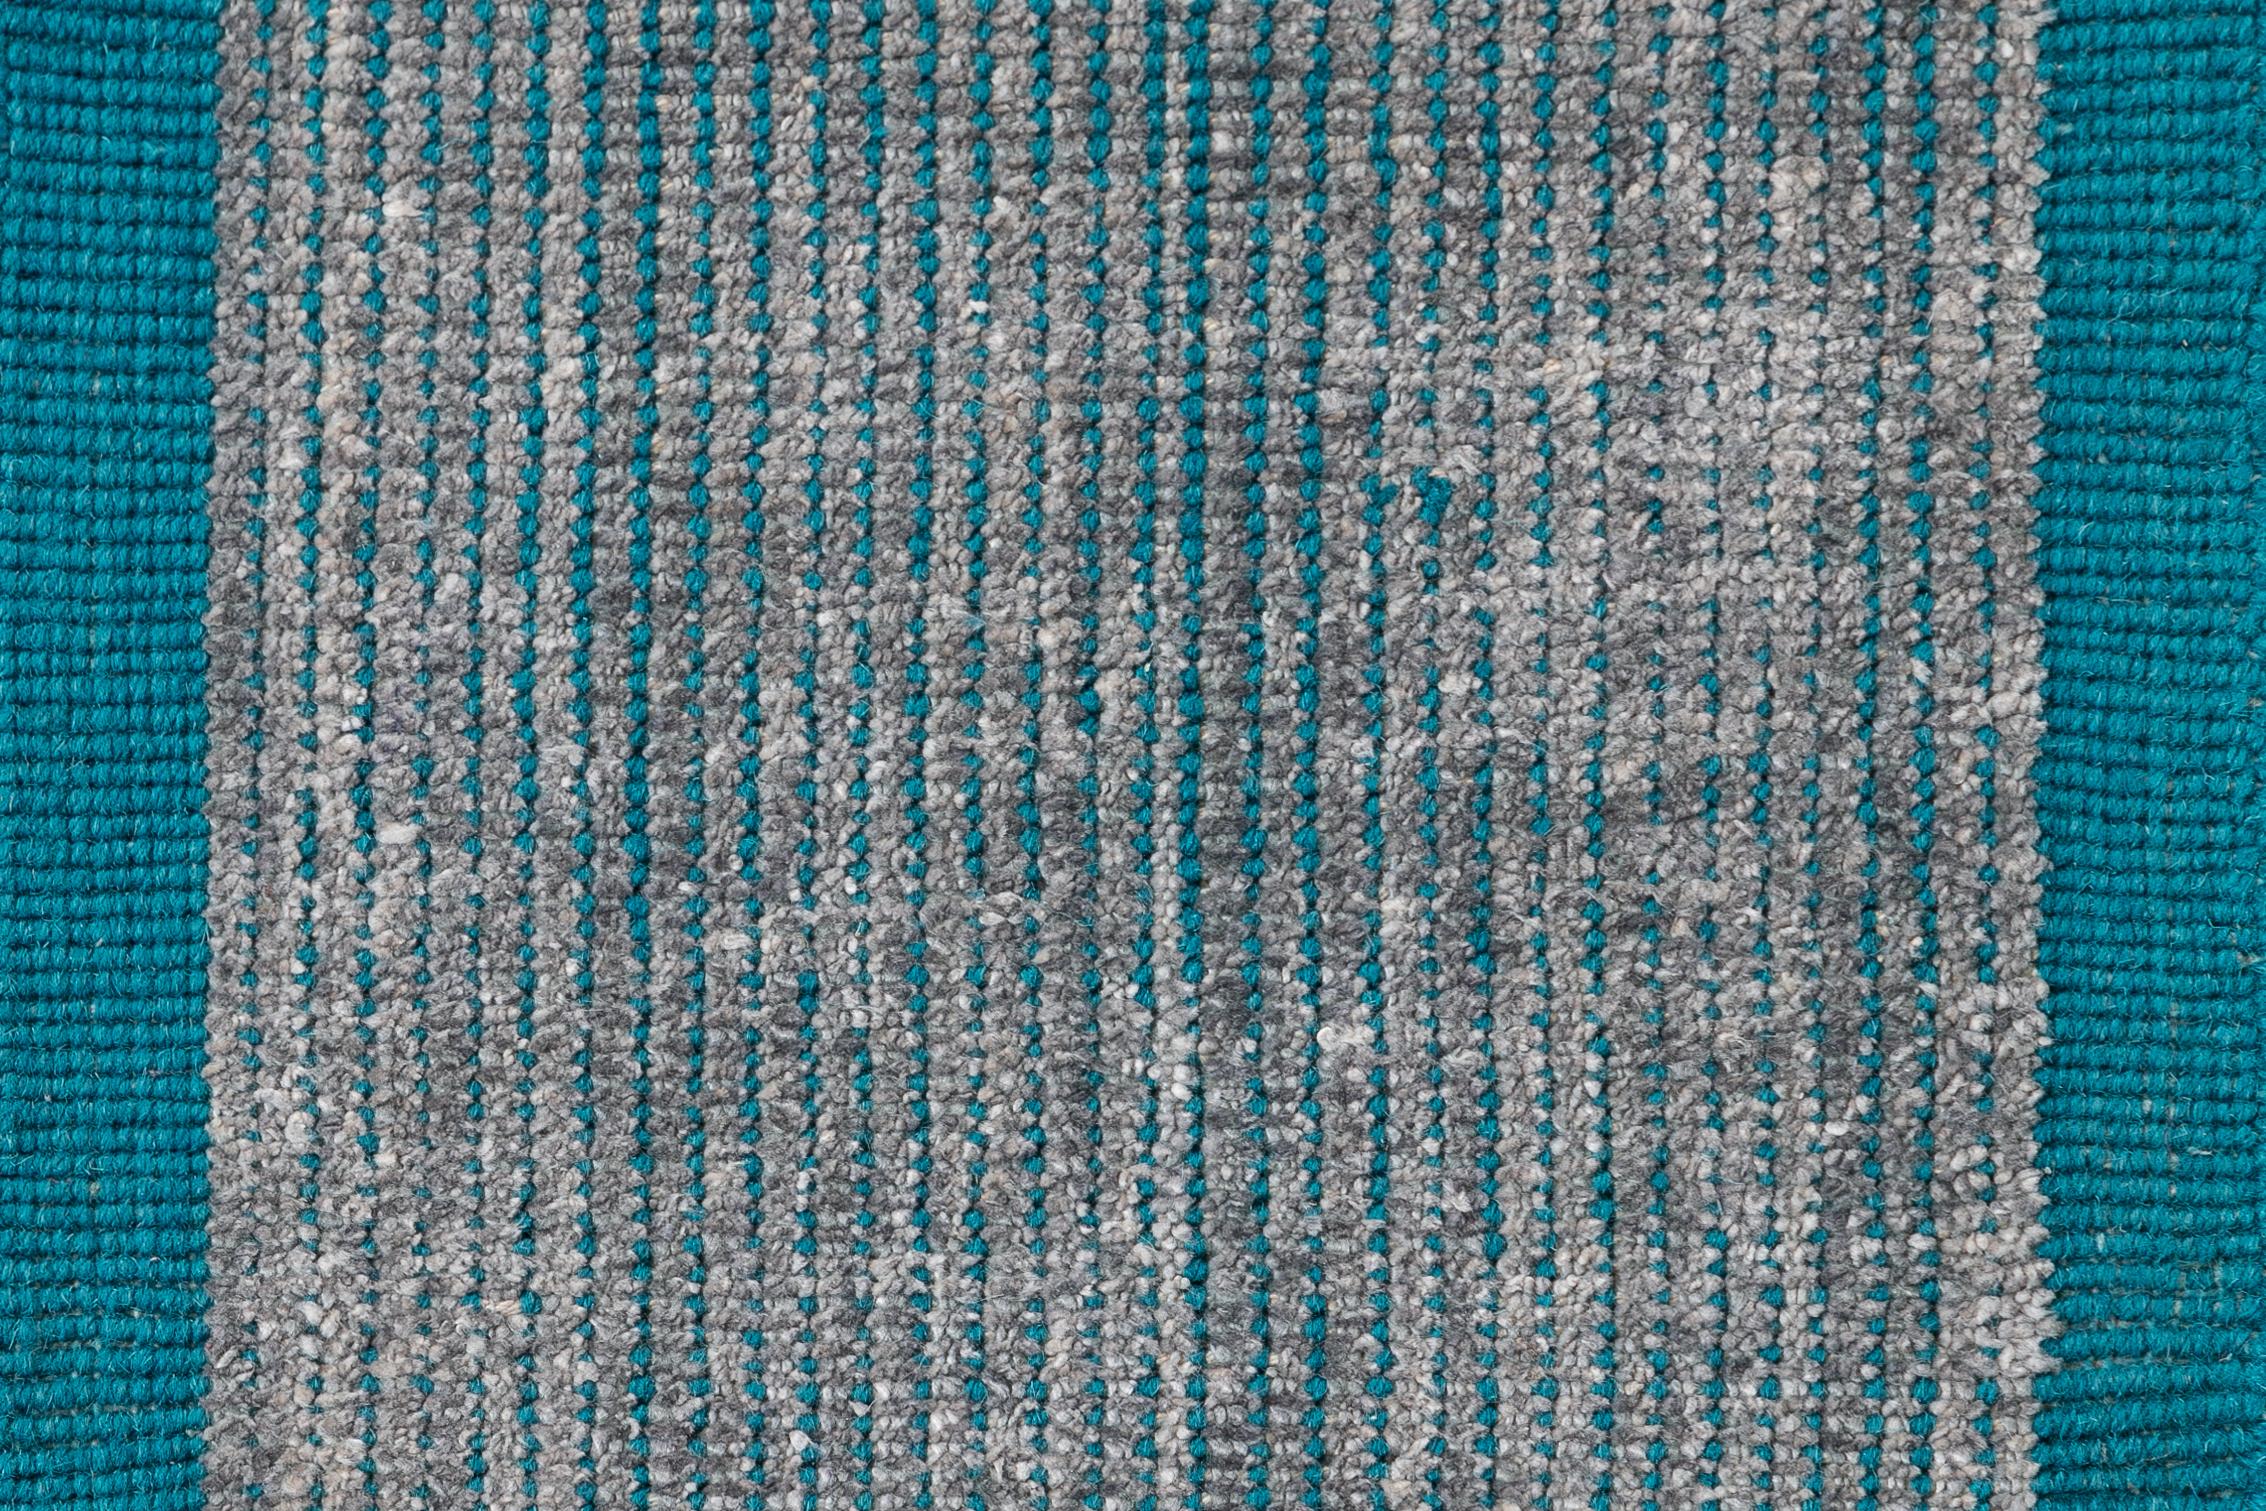 Boho custom rug. Custom sizes and colors made-to-order.

Material: Wool/bamboo silk
Lead time: Approximate 15 wks


Price is for three 1' x 1' samples, colors as shown on pictures
    